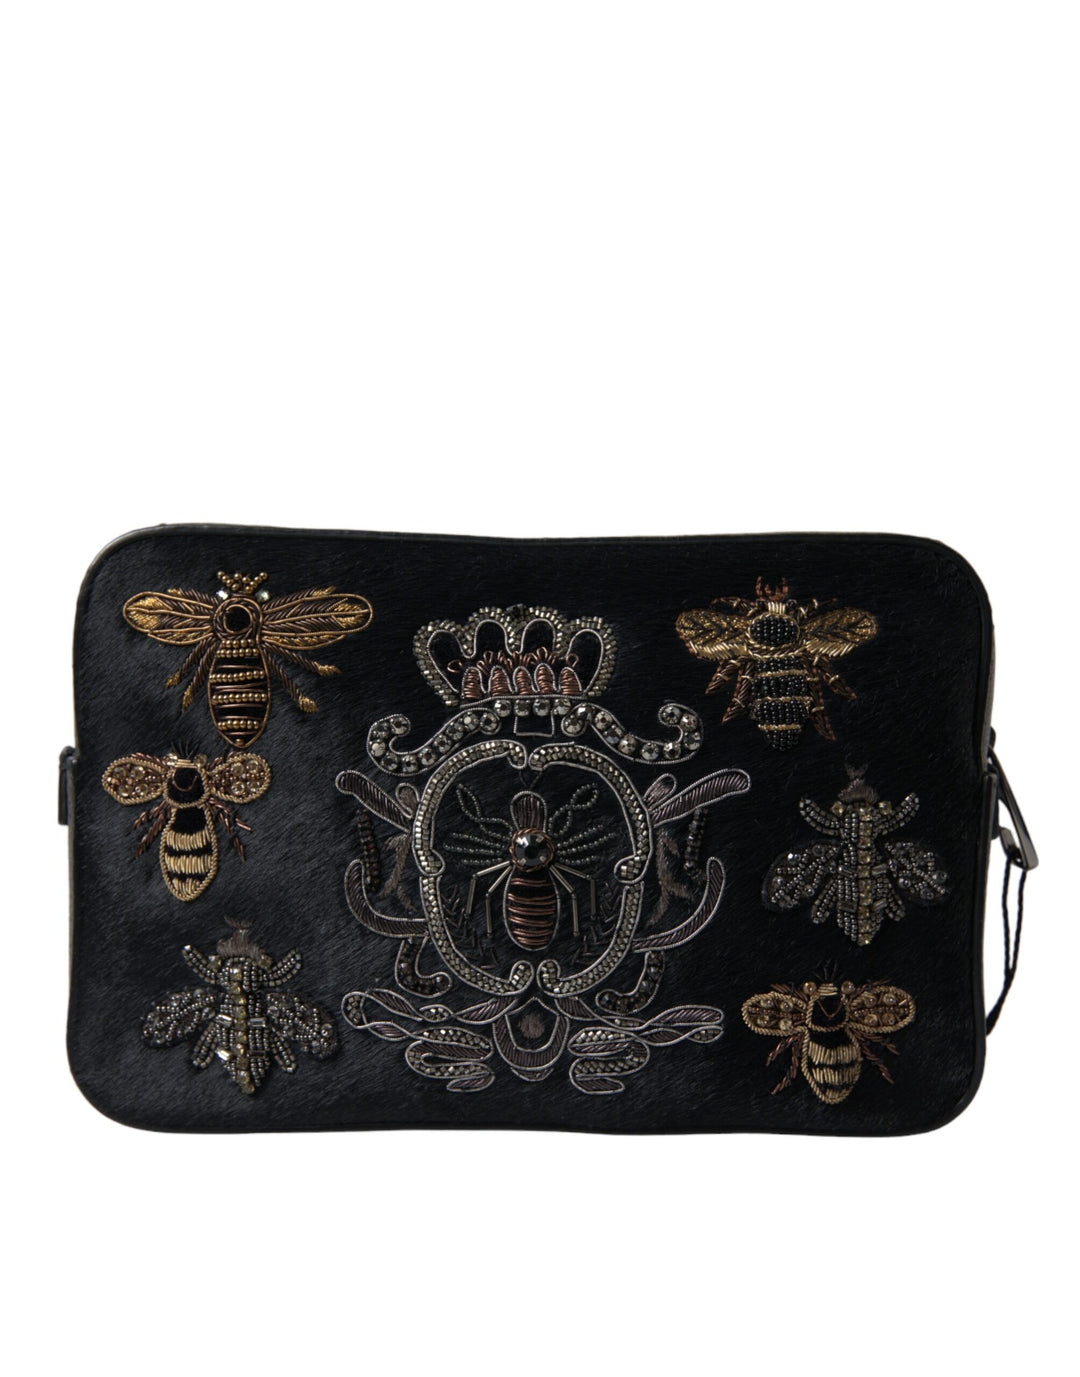 Dolce & Gabbana Elegant Black Leather Clutch with Bee Adornments